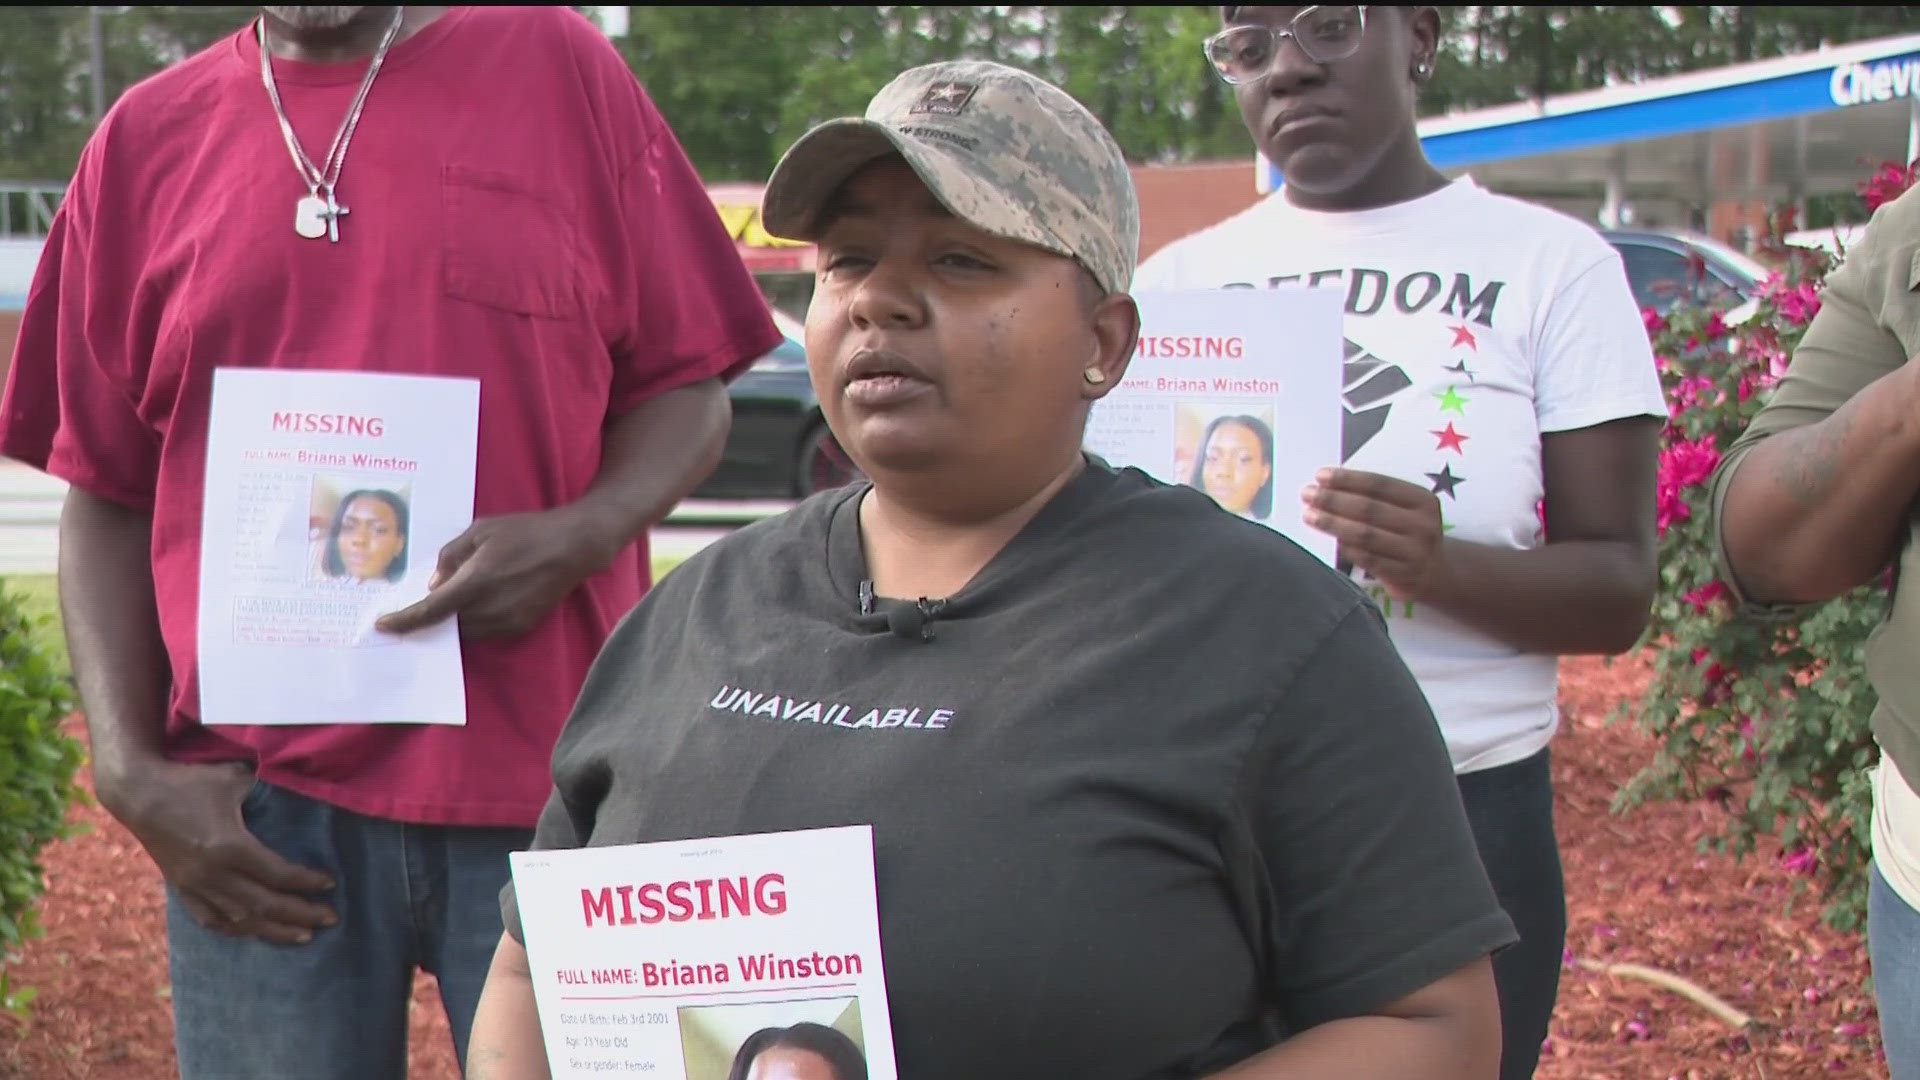 There are two persons of interests in Briana Winston's disappearance.